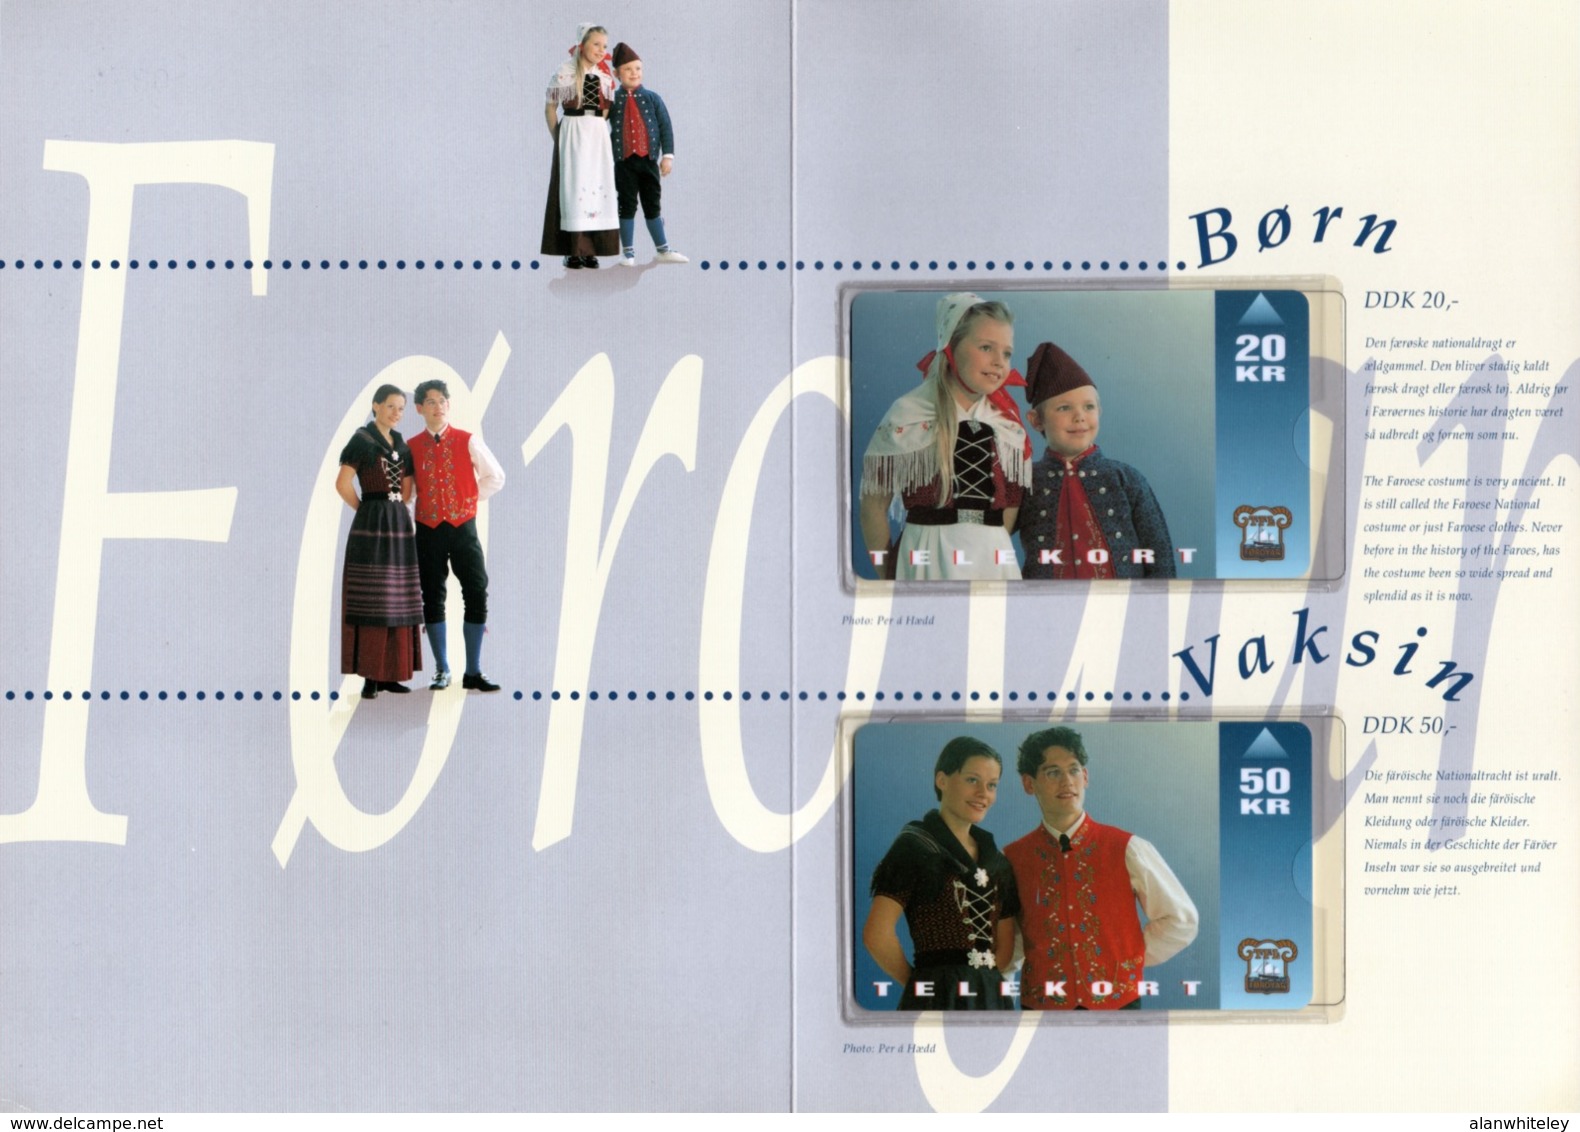 FAROES ISLANDS 1995 National Costume: Presentation Pack Containing 2 Phonecards MINT/UNUSED - Féroé (Iles)